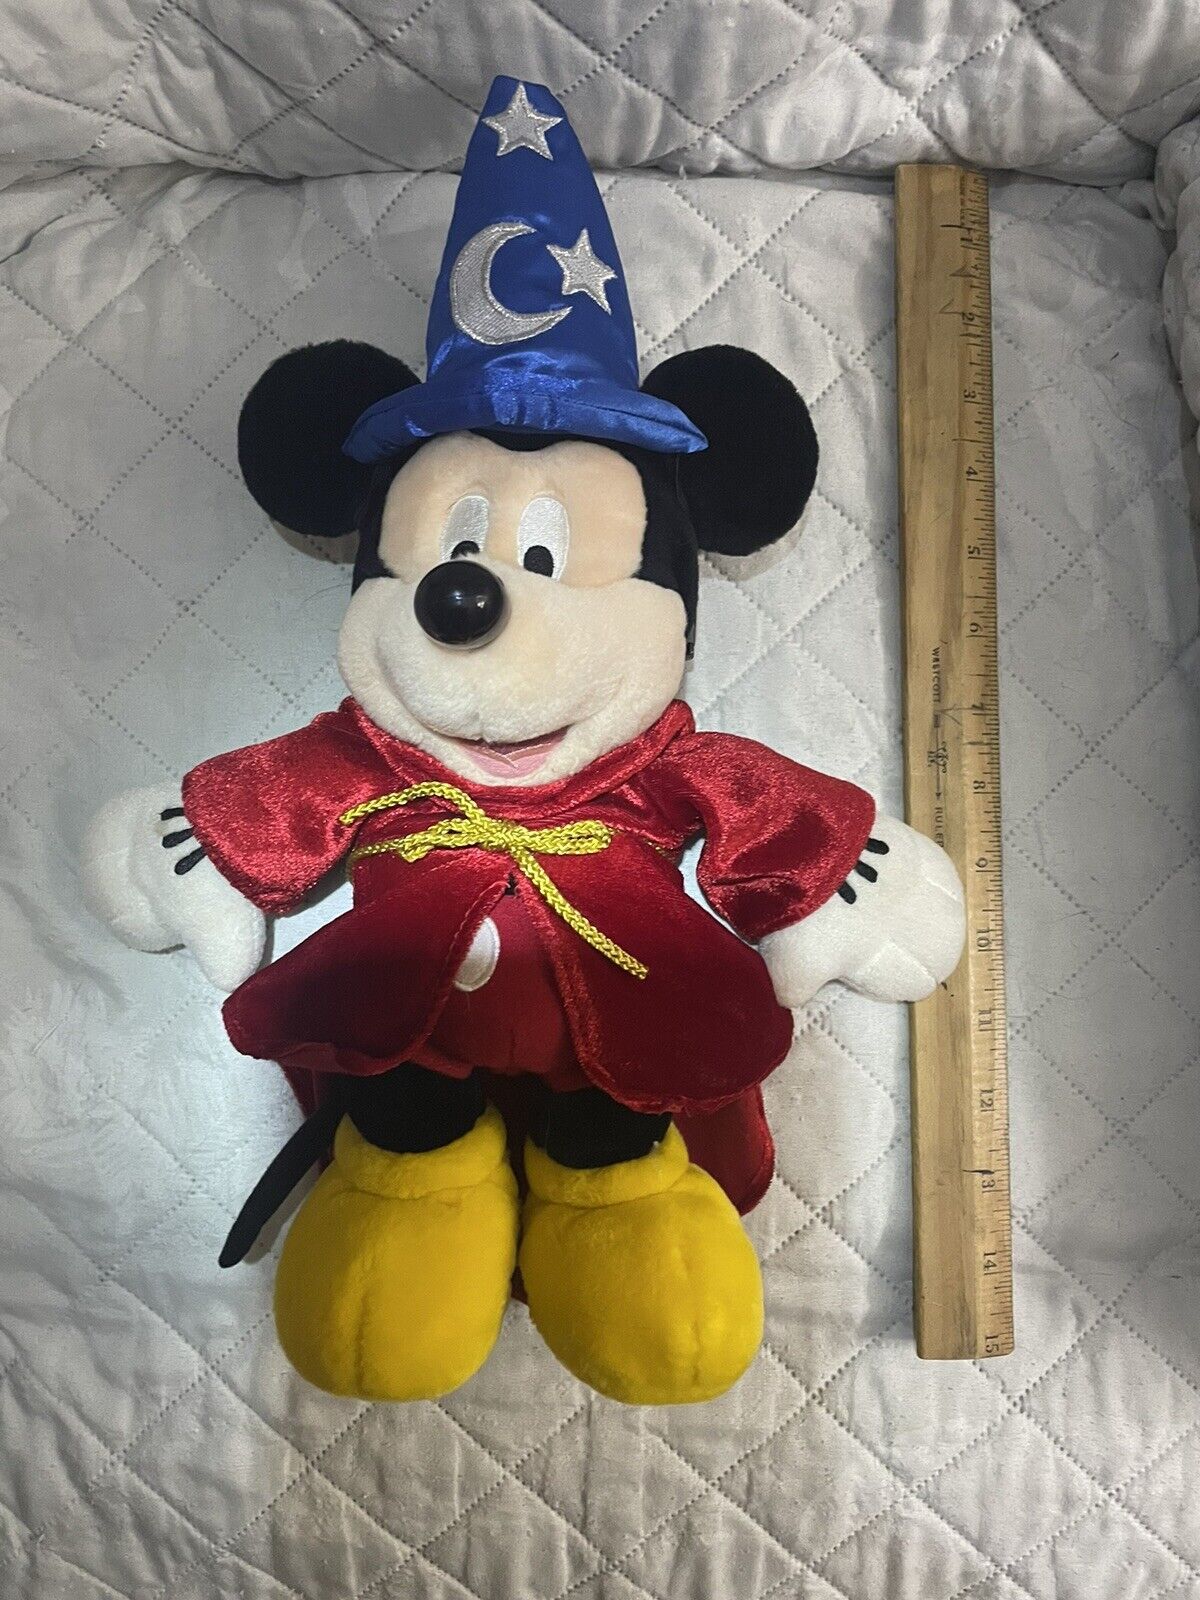 Retired Disney Pal Mickey Mouse Talking Interactive Toy Plush Fantasia Sorcerer